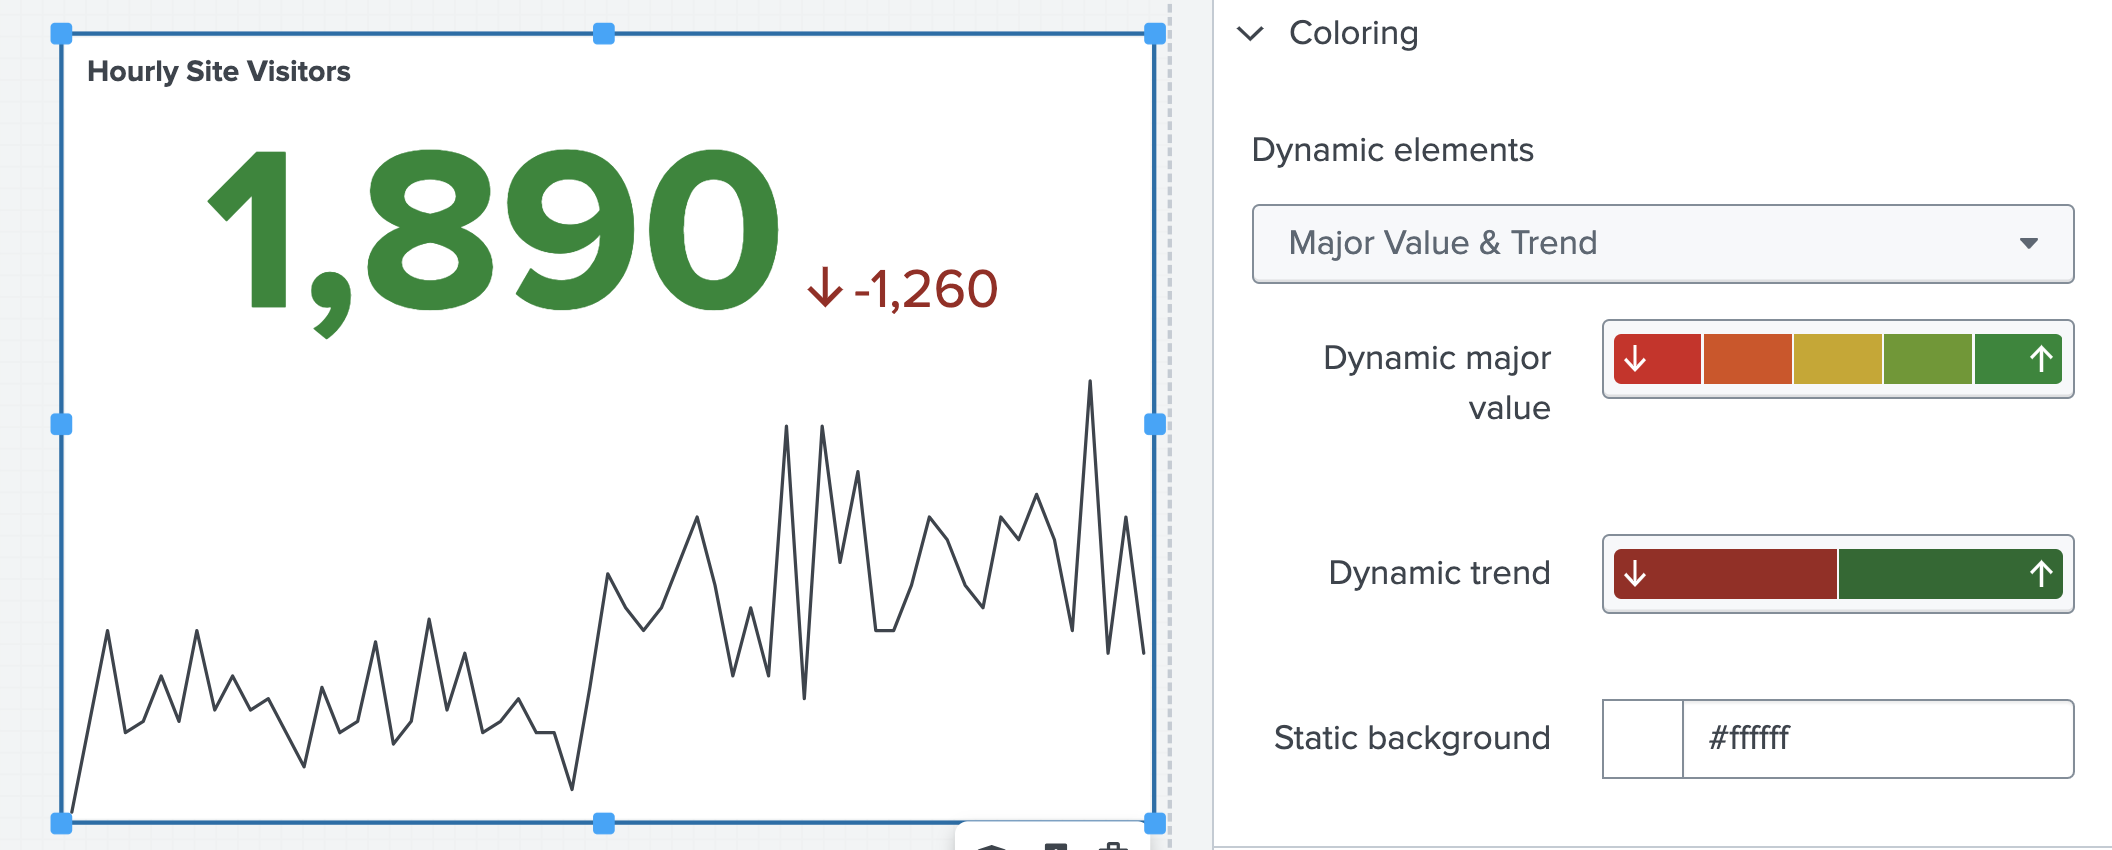 A screenshot of a single value visualization that shows hourly site visitors with a trend number and a sparkline under the single value visualization. Next to the single value visualization is a coloring panel that shows Major Value & Trend selected from the Dynamic elements drop-down menu.